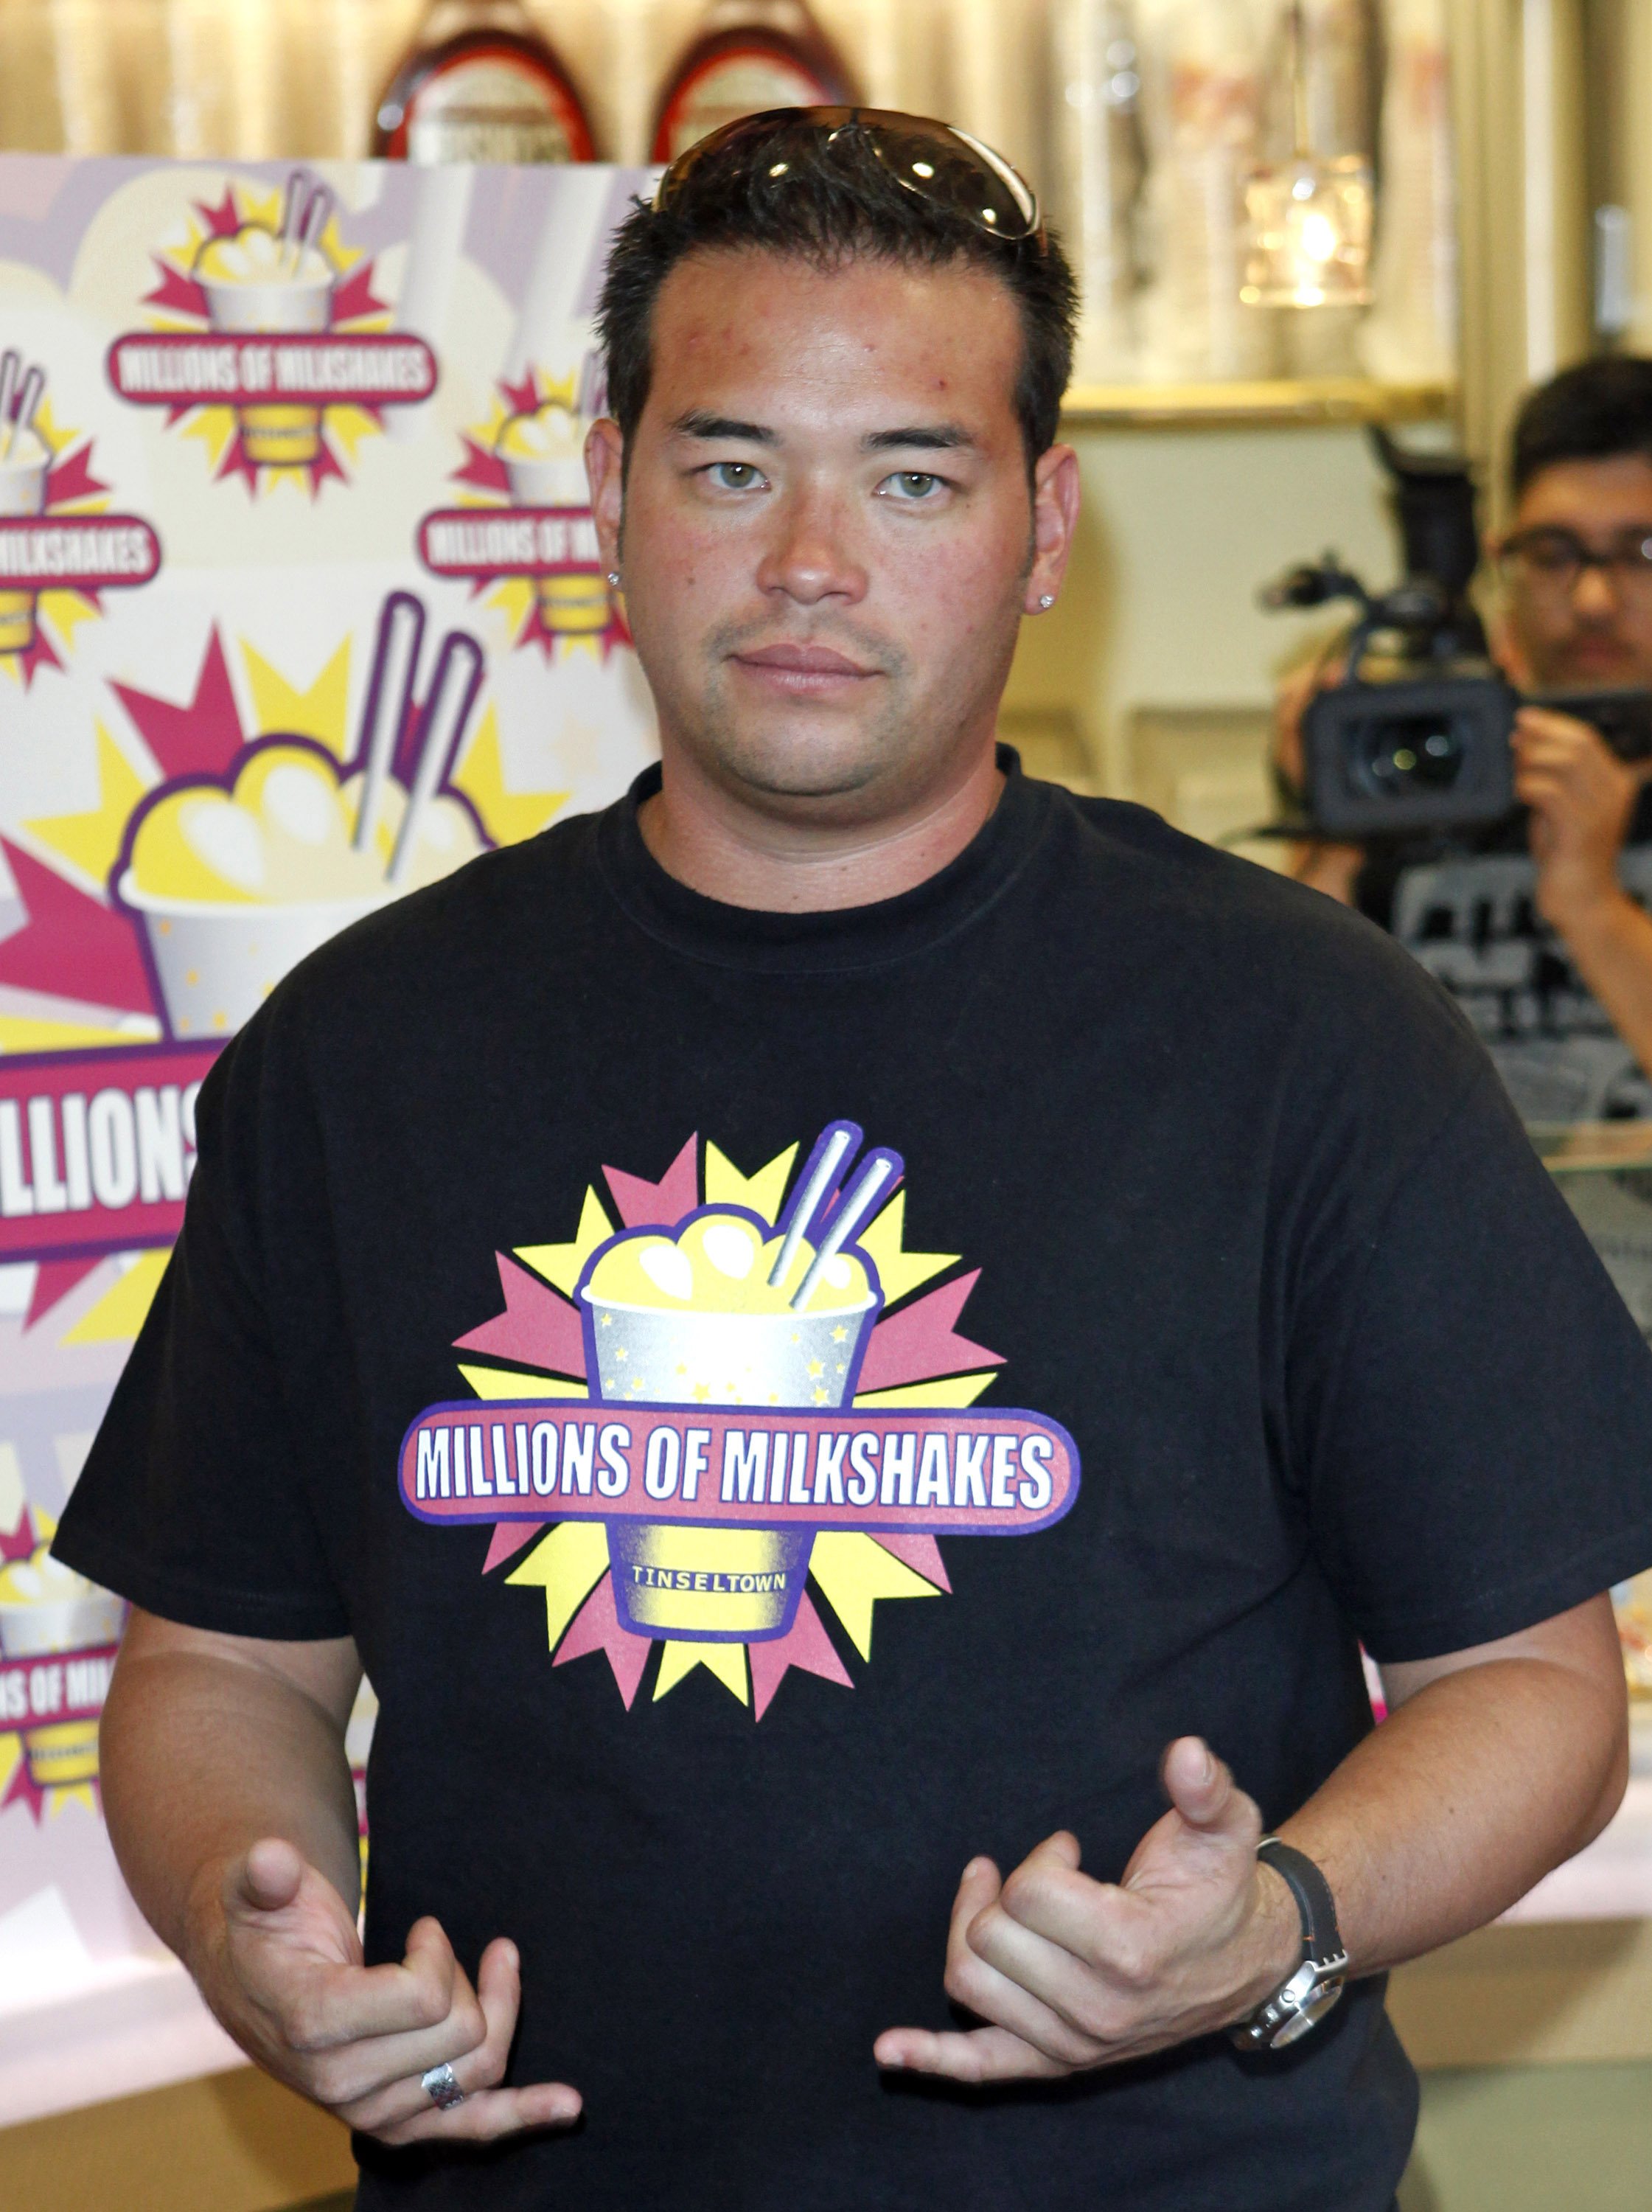 Jon Gosselin at the launch of his milkshake at Millions of Milkshakes, West Hollywood in 2009 | Source: Getty Images 